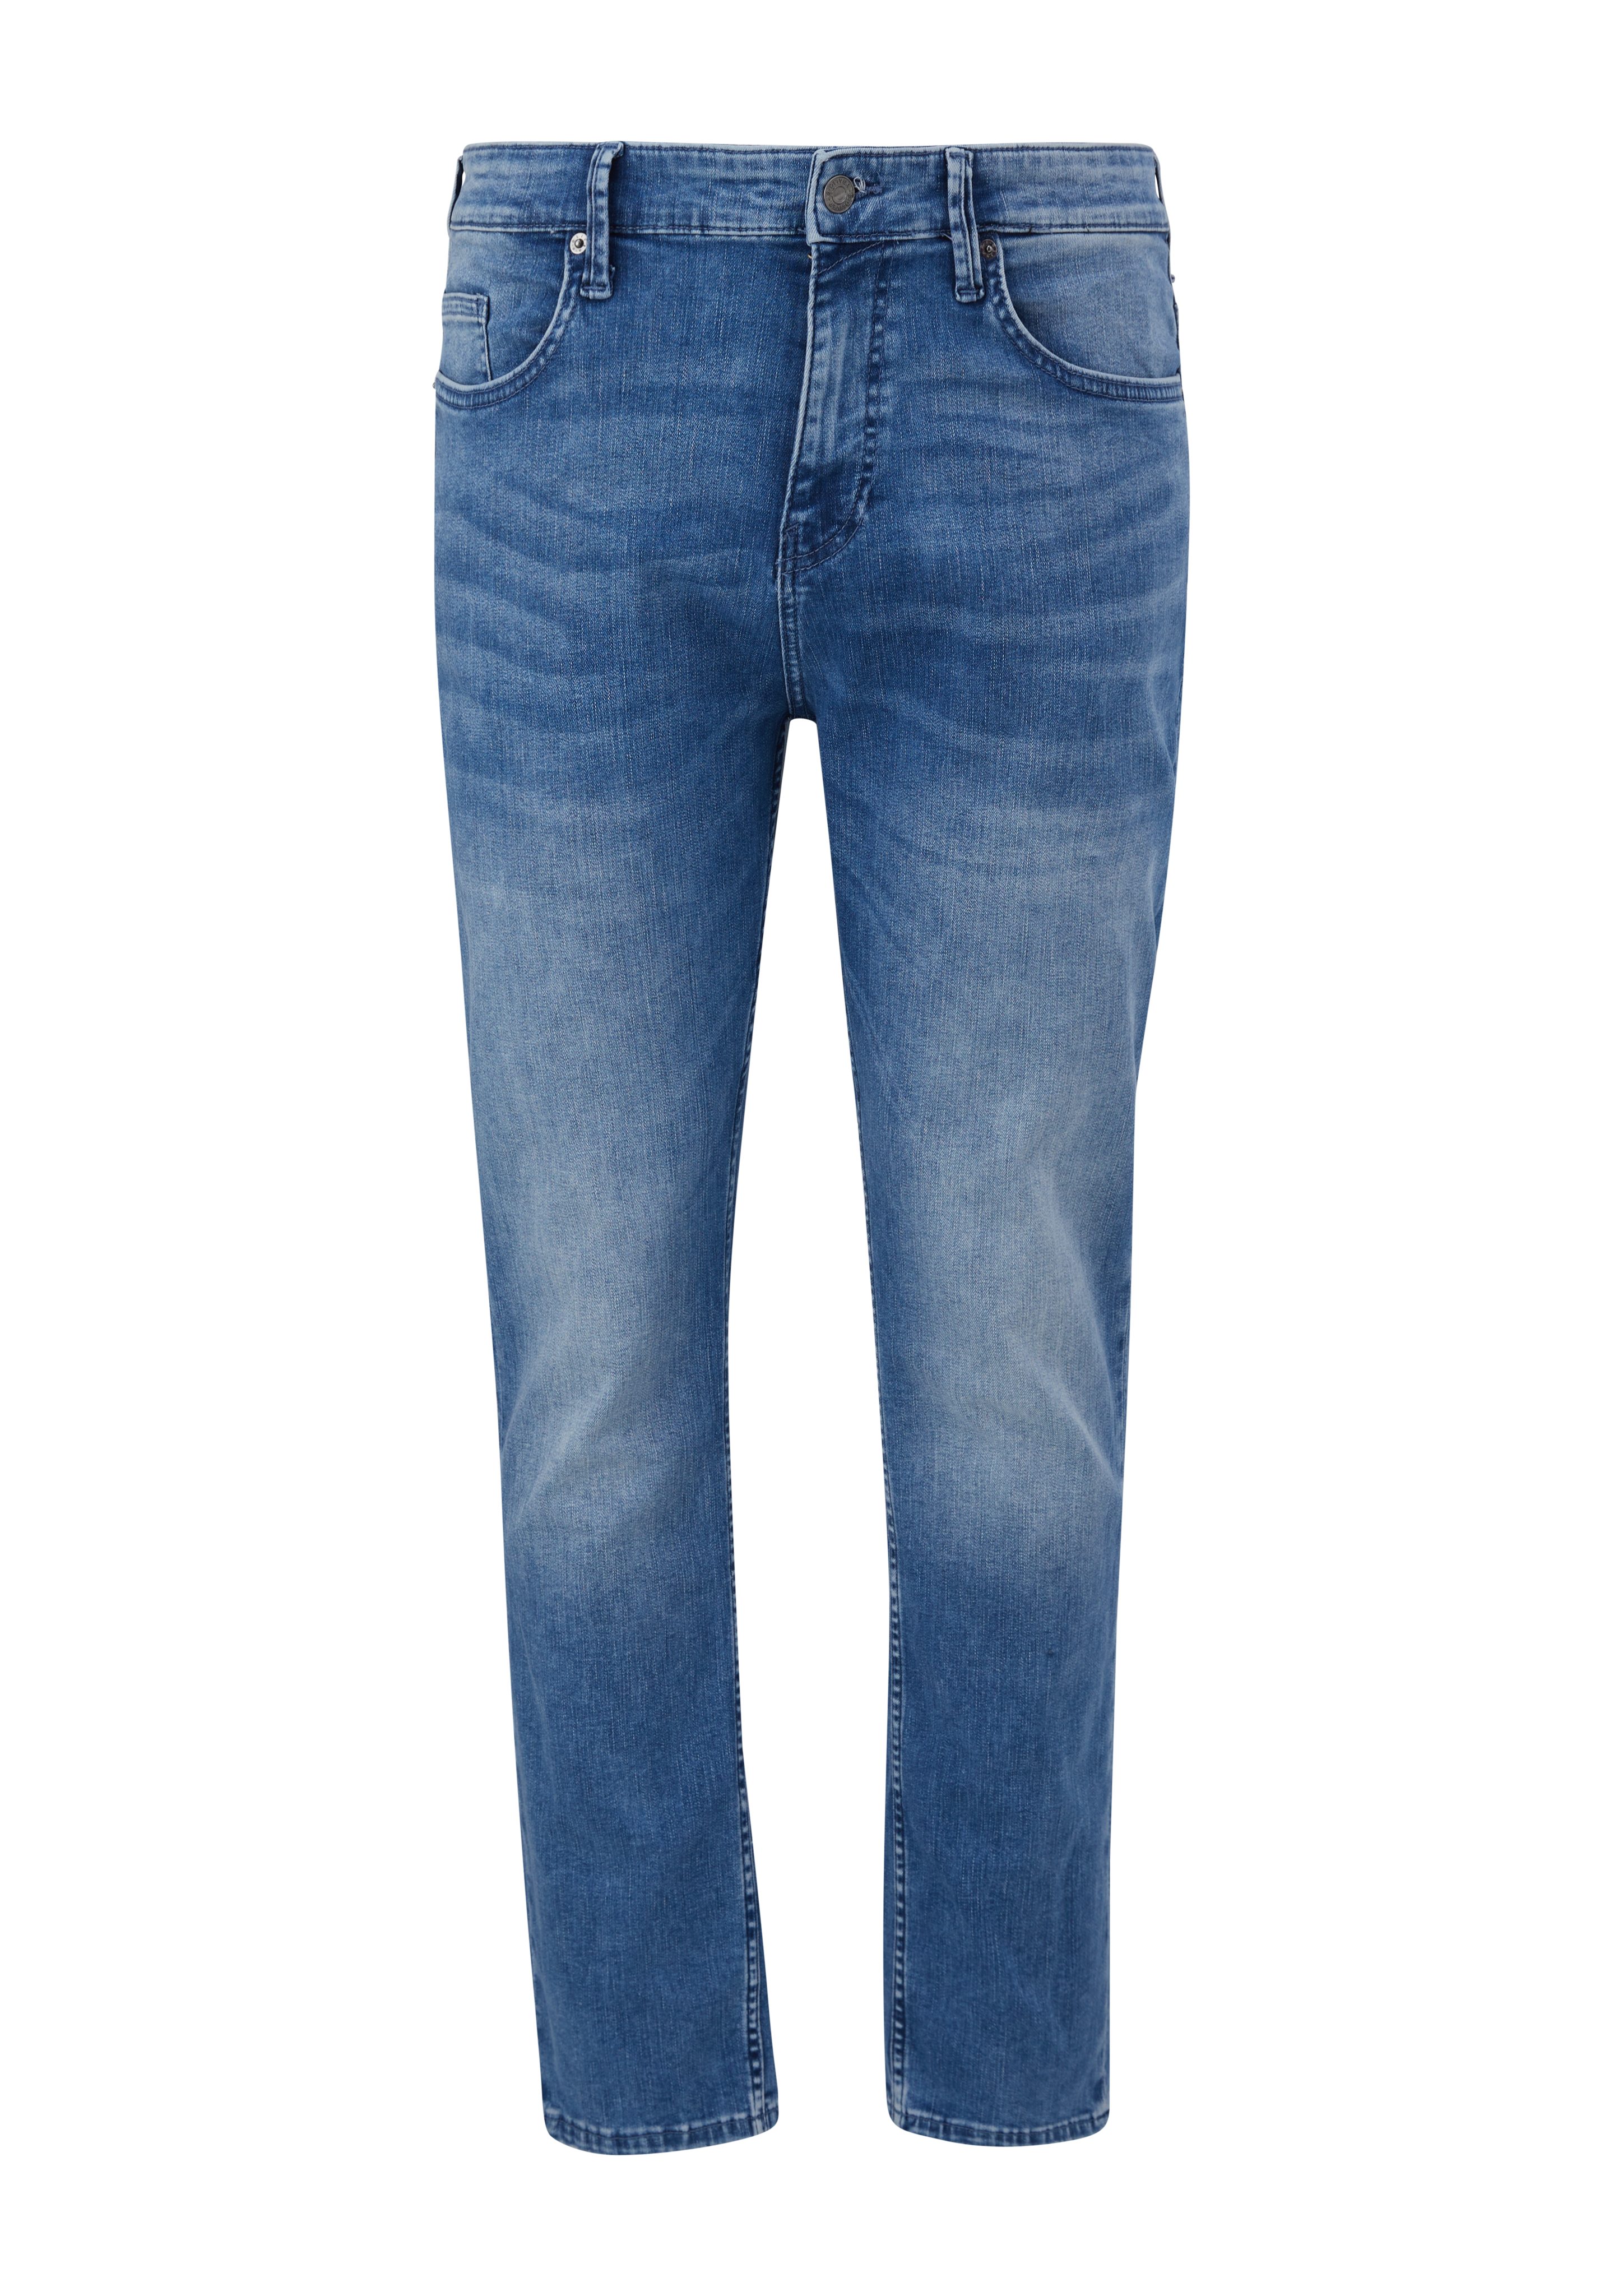 s.Oliver Stoffhose Jeans Casby / Straight / Leg / Fit Waschung Mid Rise Relaxed ozeanblau